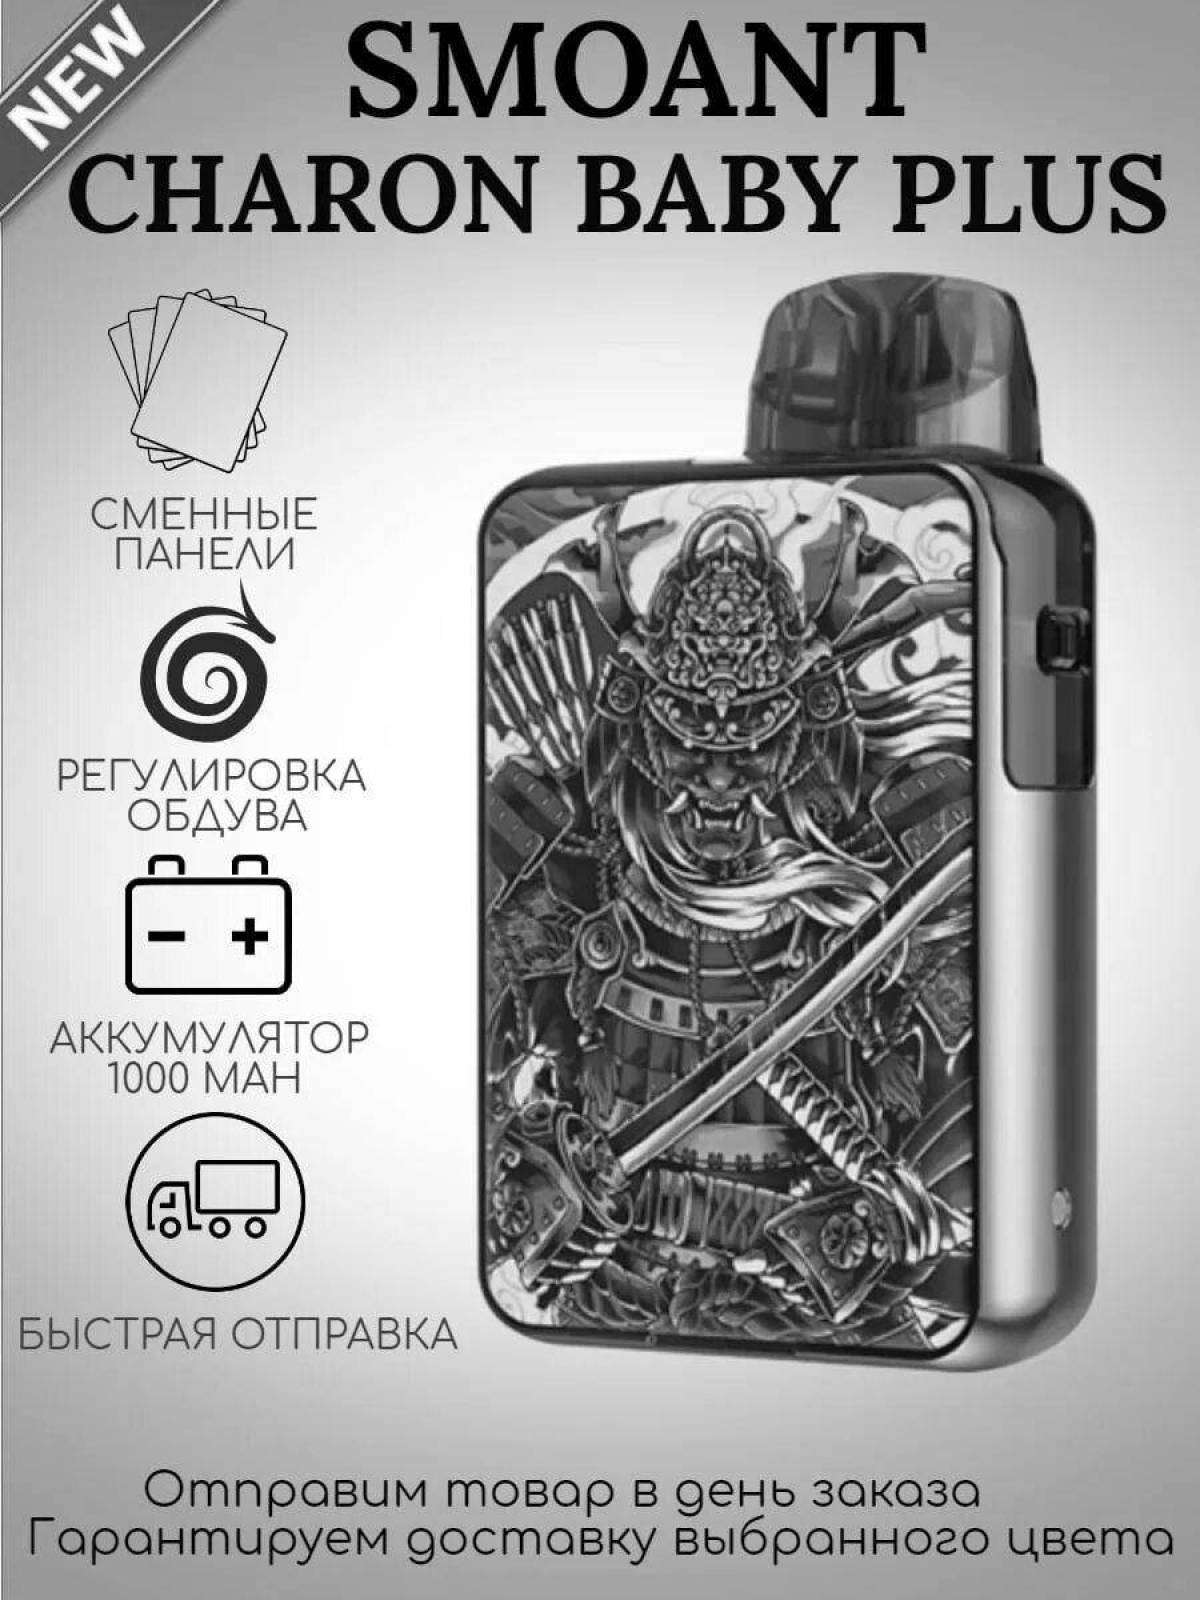 Blessed Charon baby plus